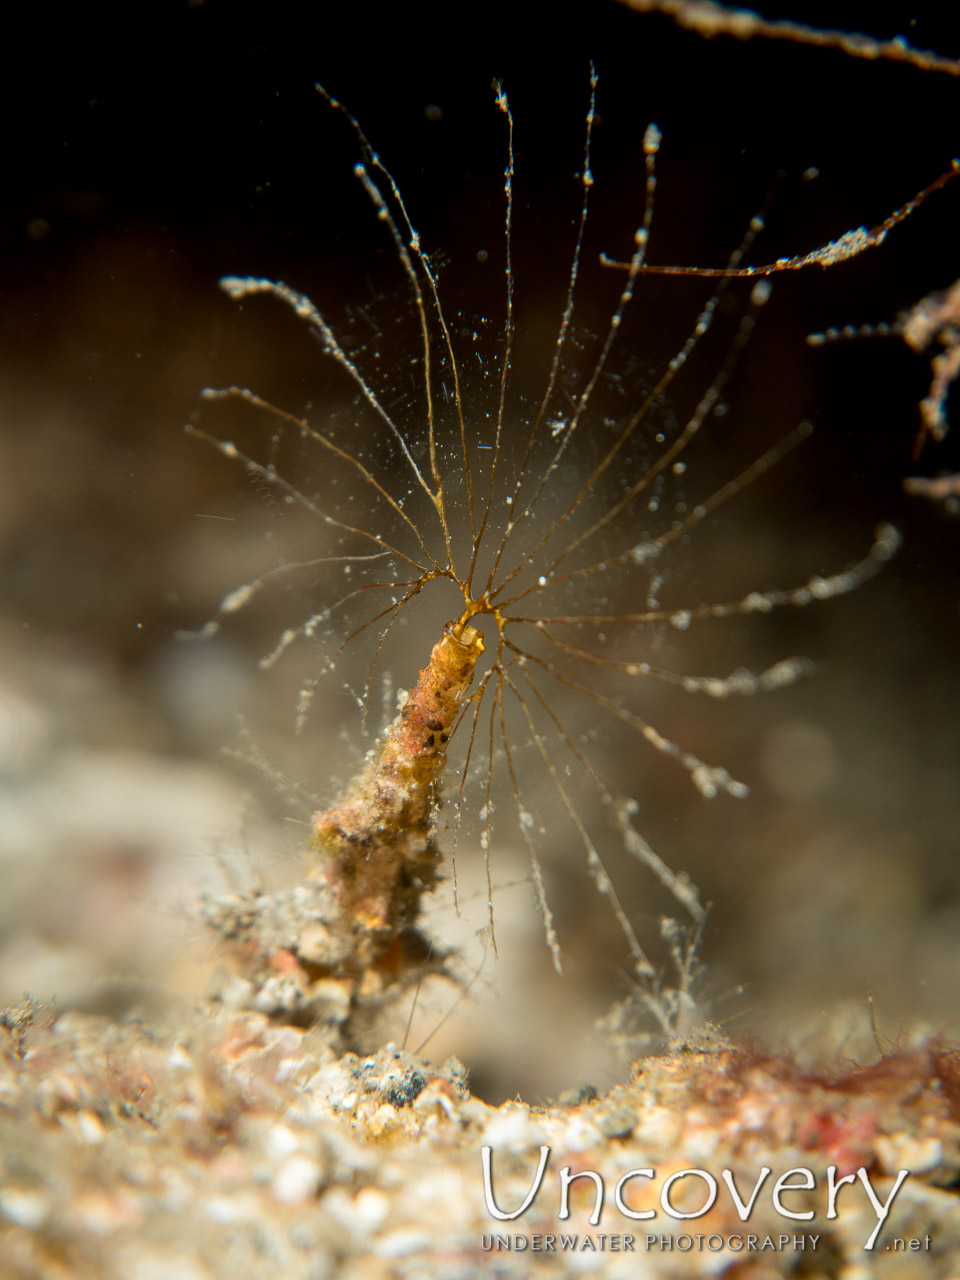 Hydroid shot in Indonesia|North Sulawesi|Lembeh Strait|Nudi Retreat